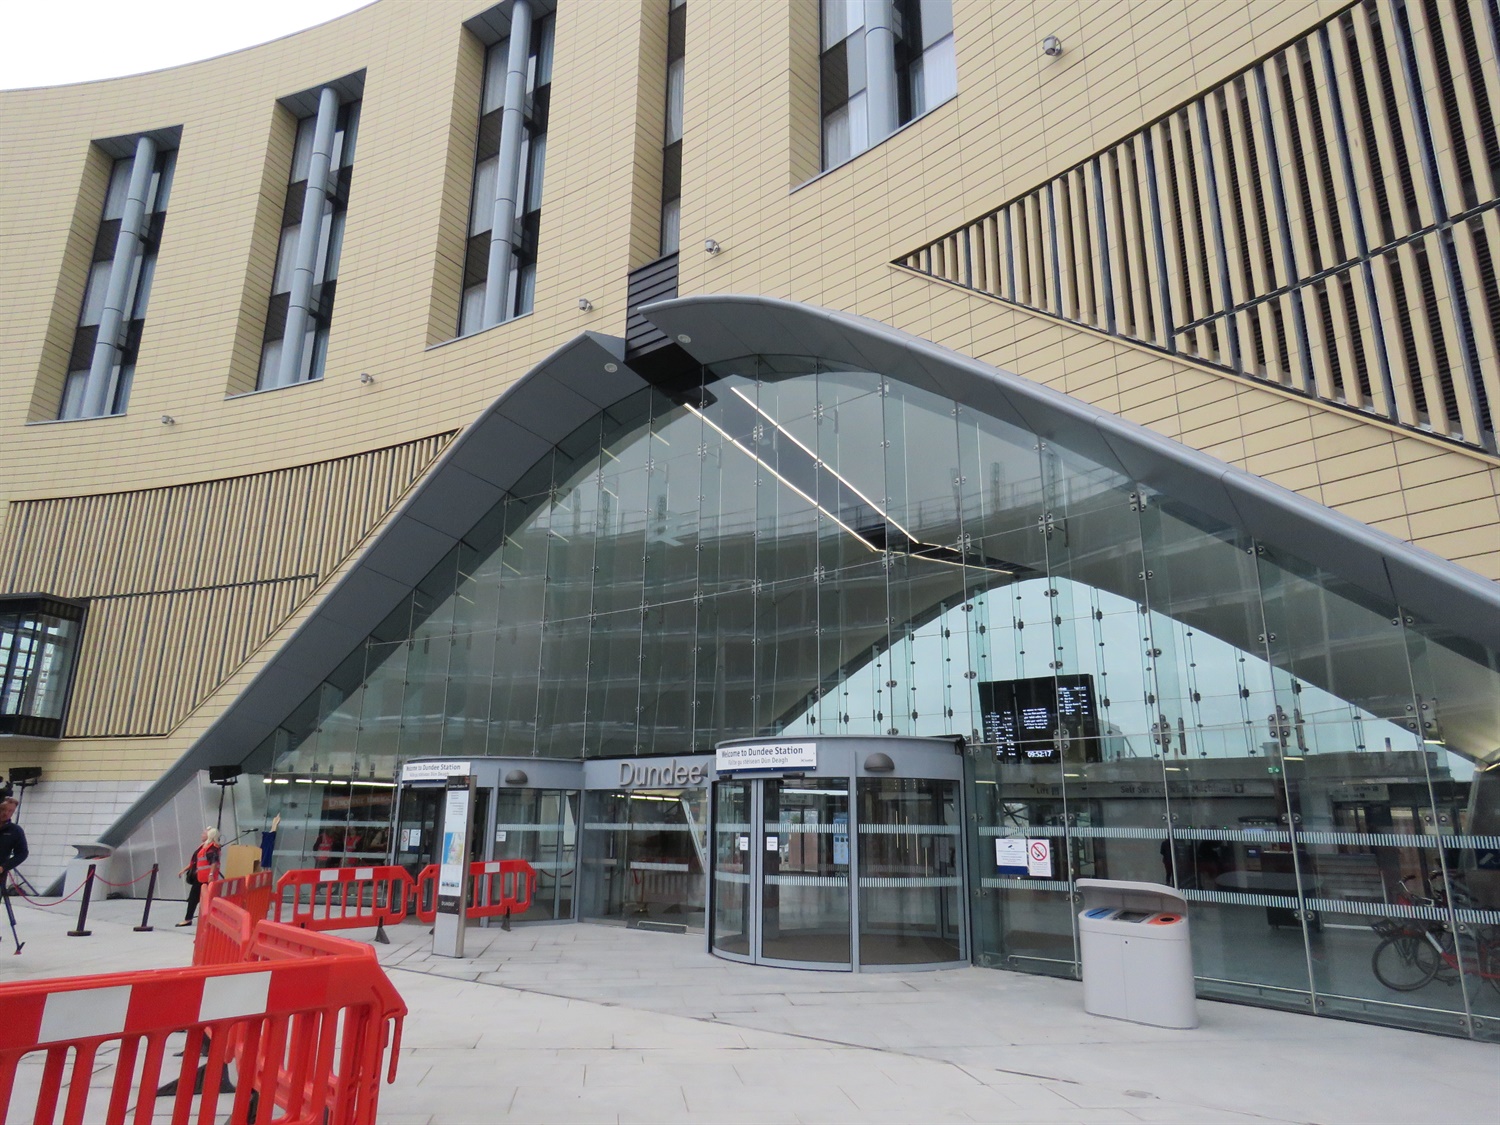 State-of-the-art Dundee station opened after 20 years of planning